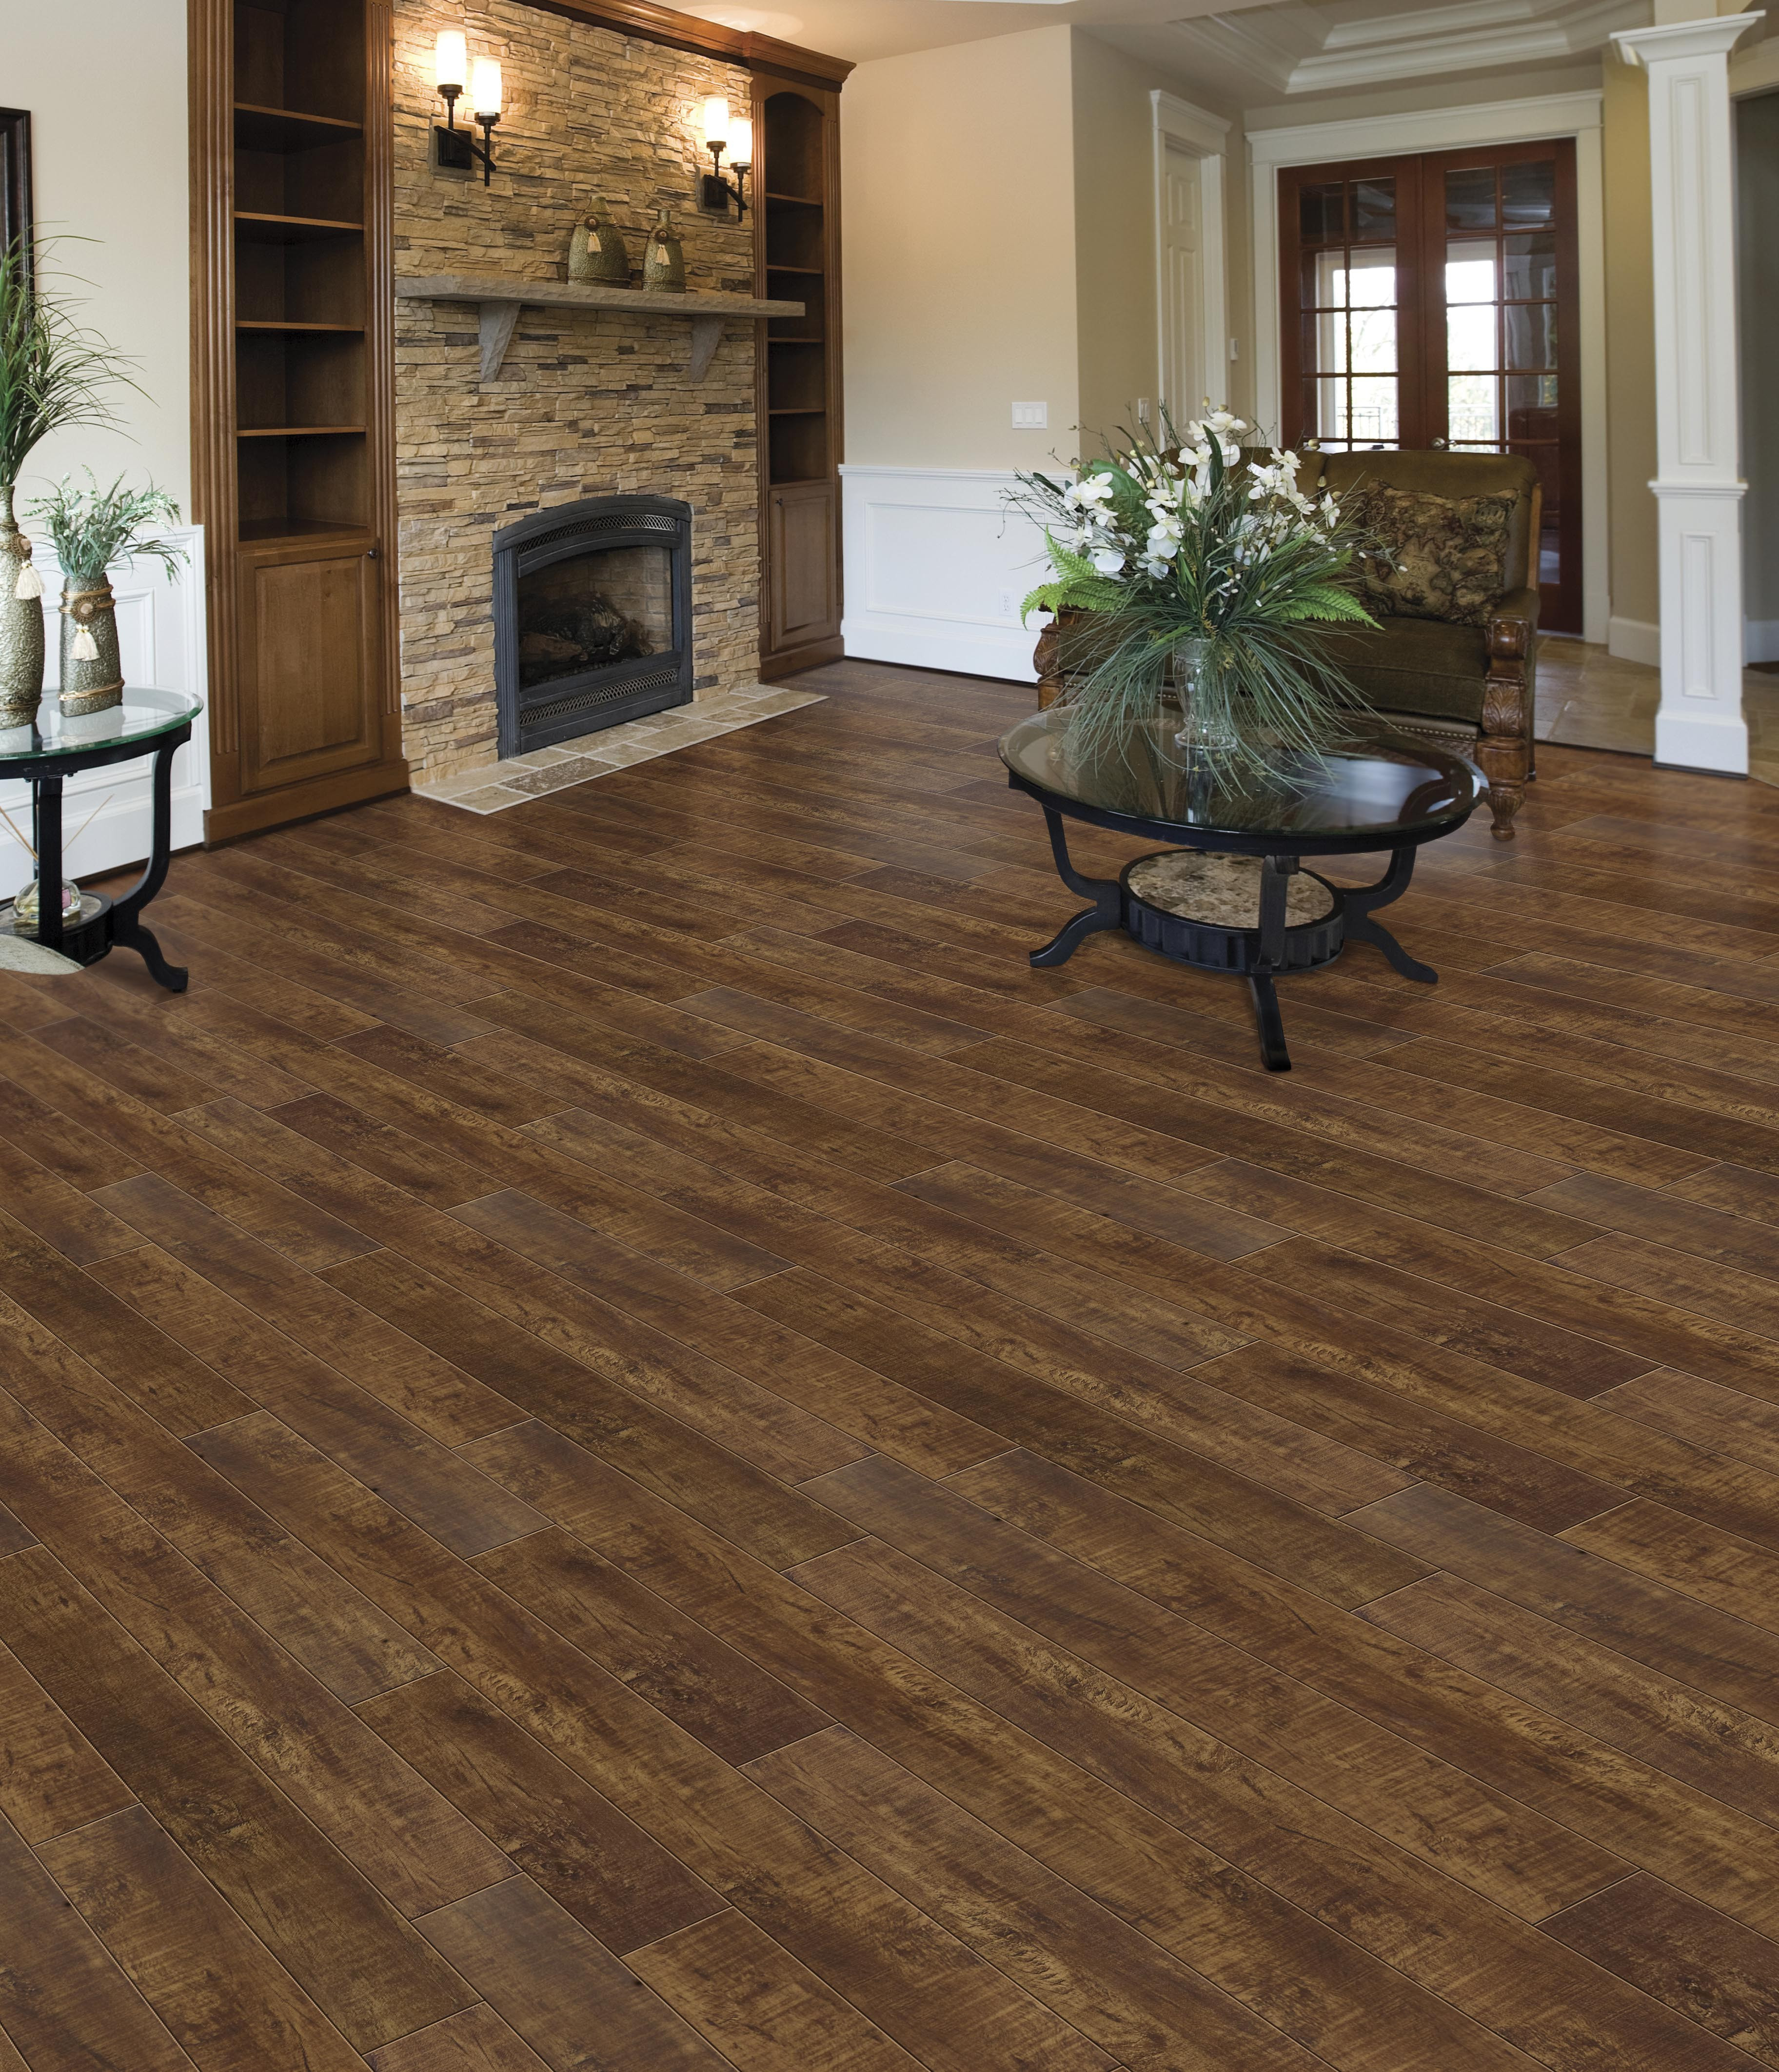 Costco Engineered Hardwood Flooring Reviews Of Costco Shaw Flooring Reviews 50 Fresh Shaw Laminate Flooring Reviews Intended for Costco Shaw Flooring Reviews Post Taged with Craigslist Table